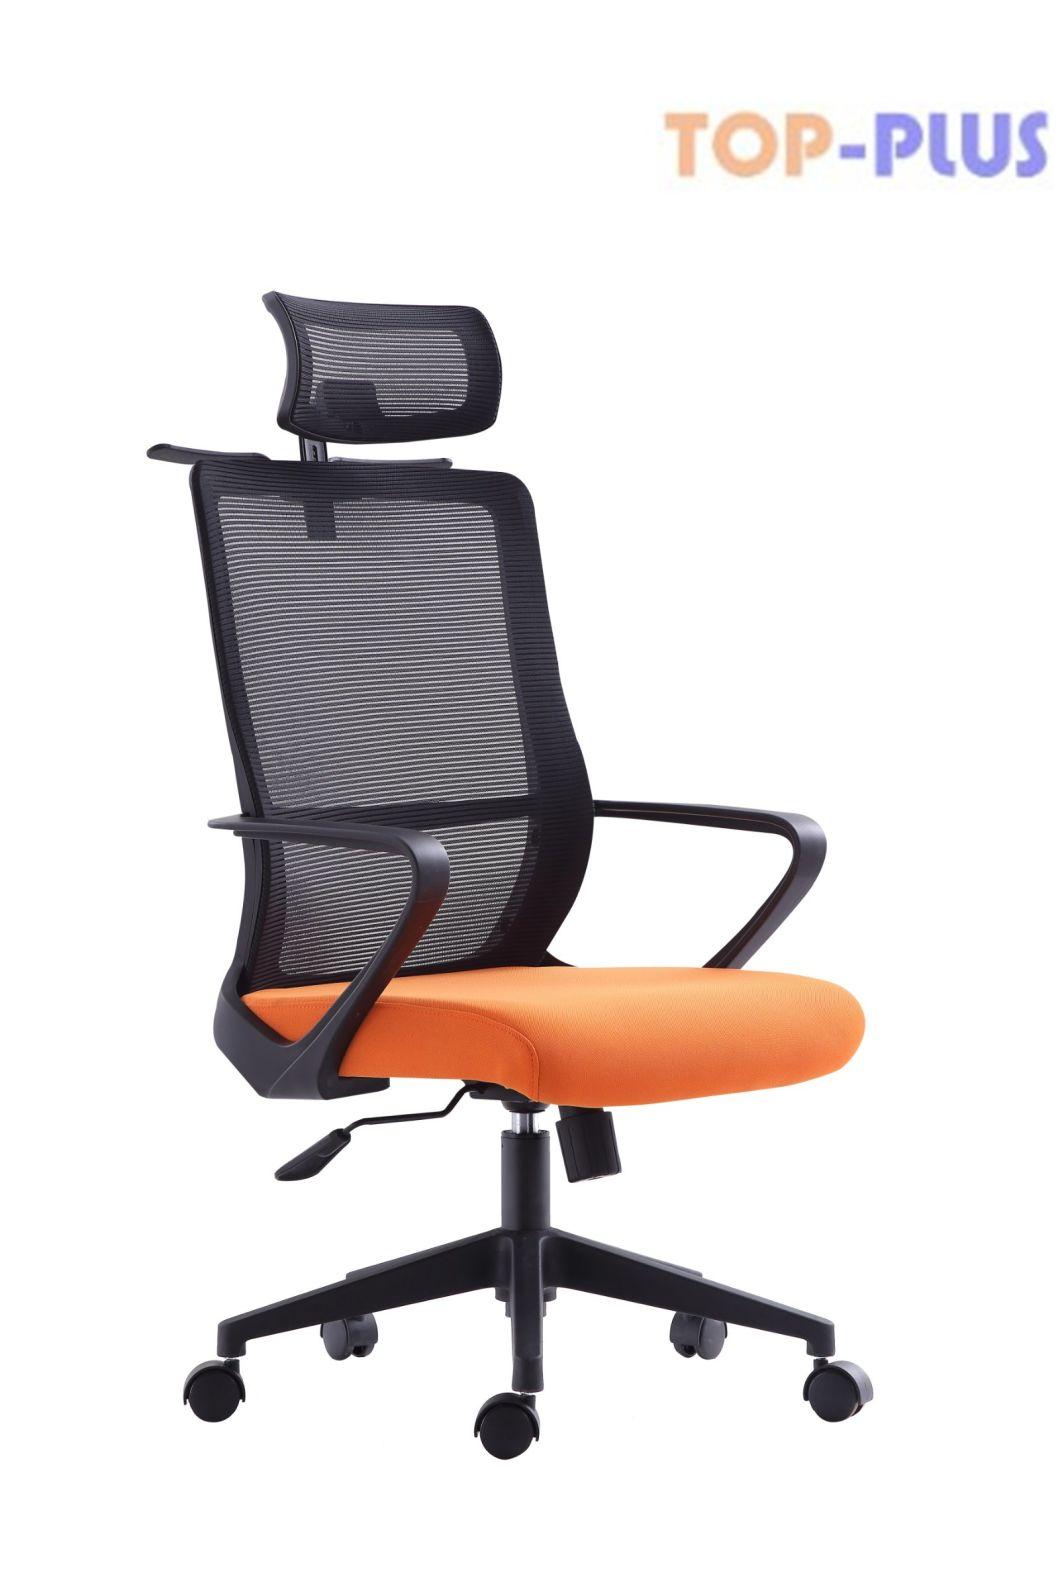 Modern High Back Mesh Executive Manager Computer Office Chair